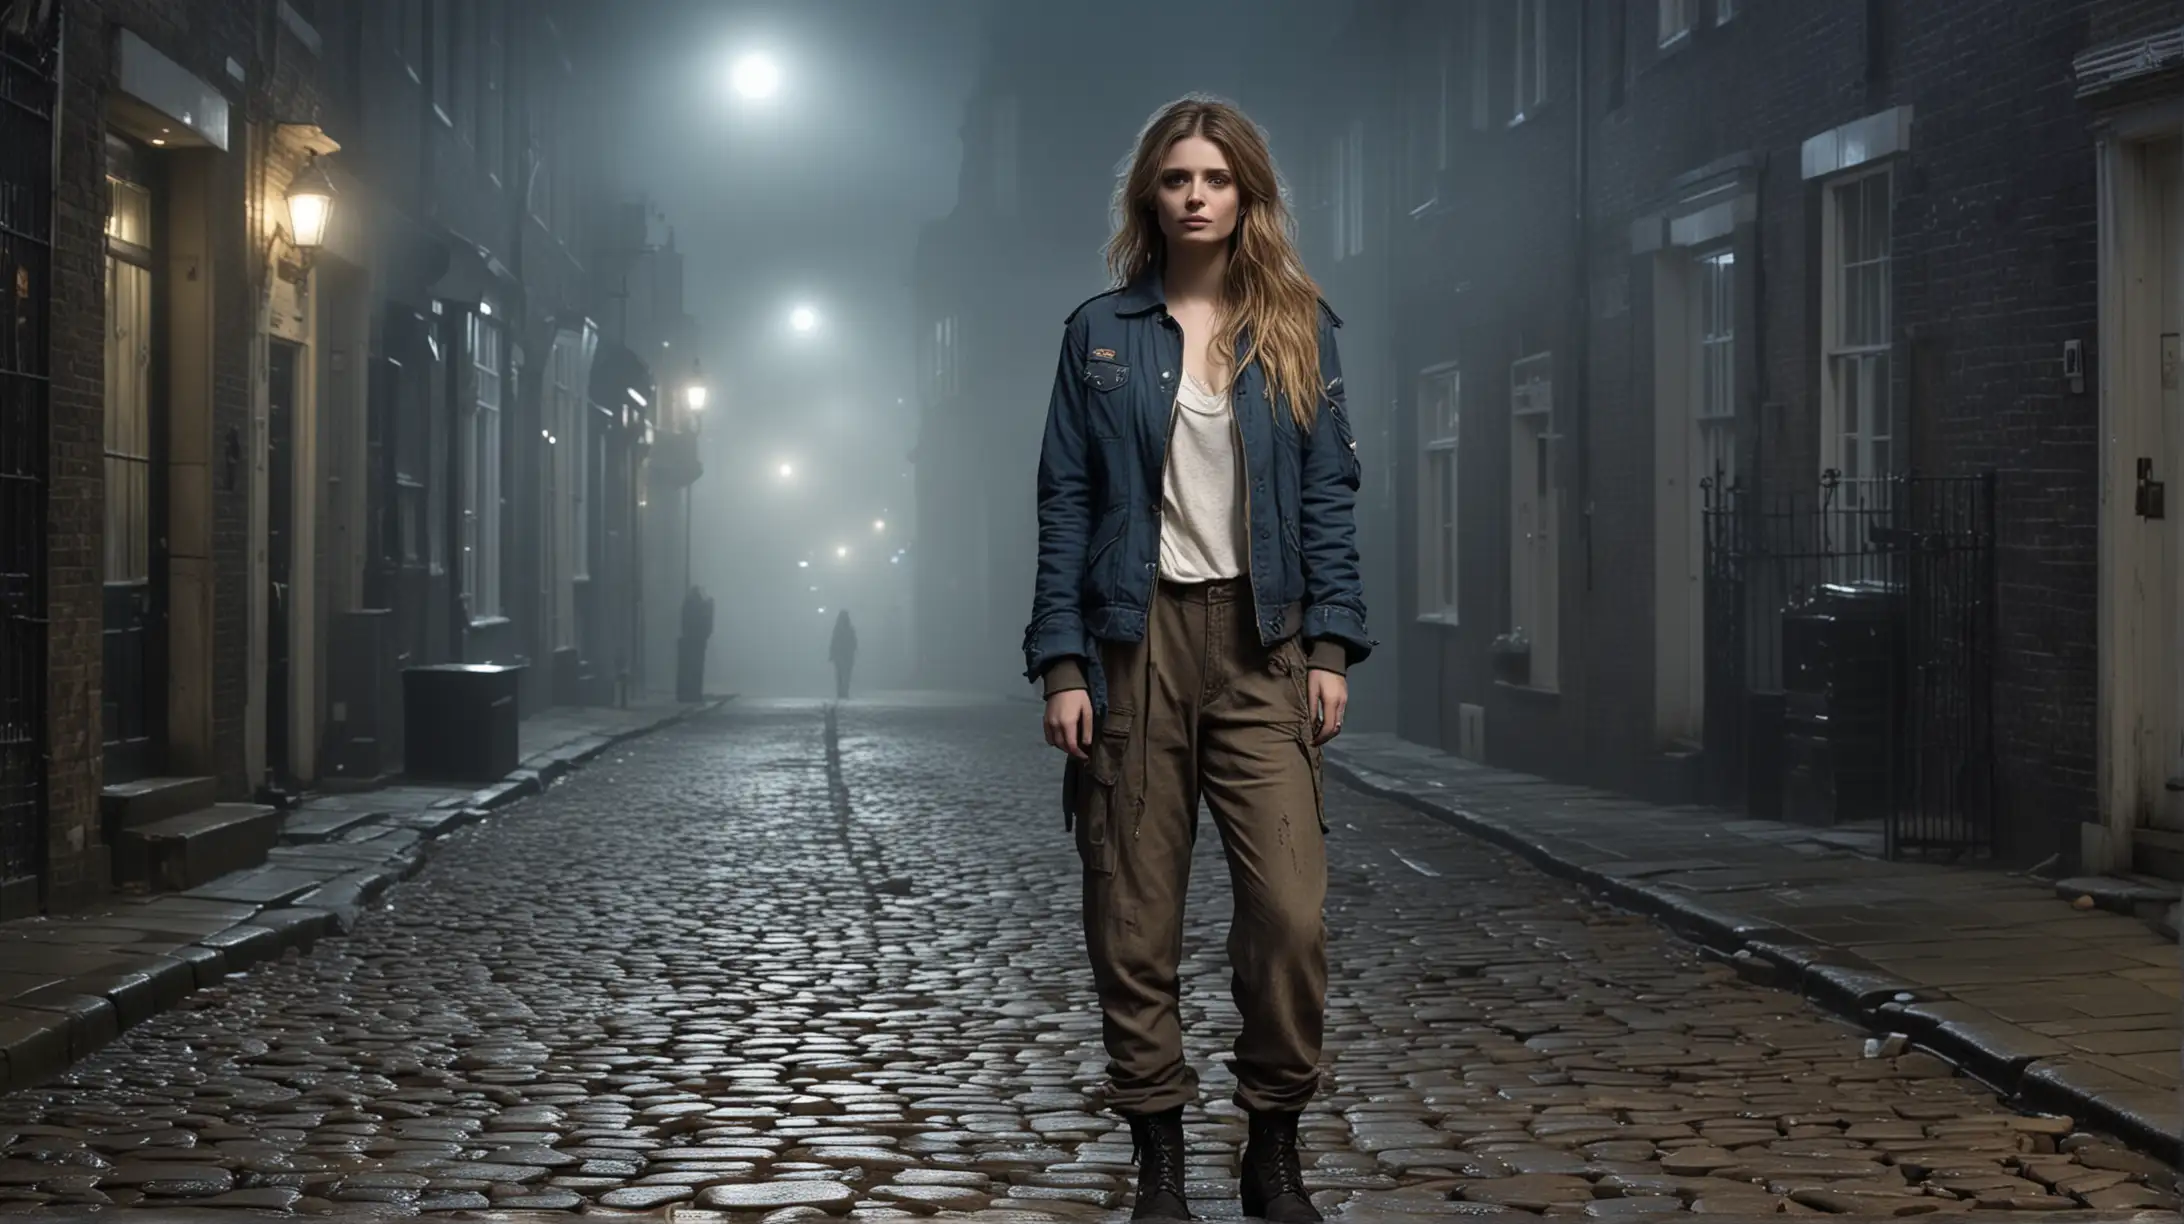 Create a cinematic image of an 18 girl, dressed in a junker jacket, junker pants, blue eyes, long  hair, dirty face, looks like Mischa Barton. standing on a cobble stoned deserted street on a foggy moonlit night in old London.  Atmosphere is a sense of errie mystery. Photo realistic. 